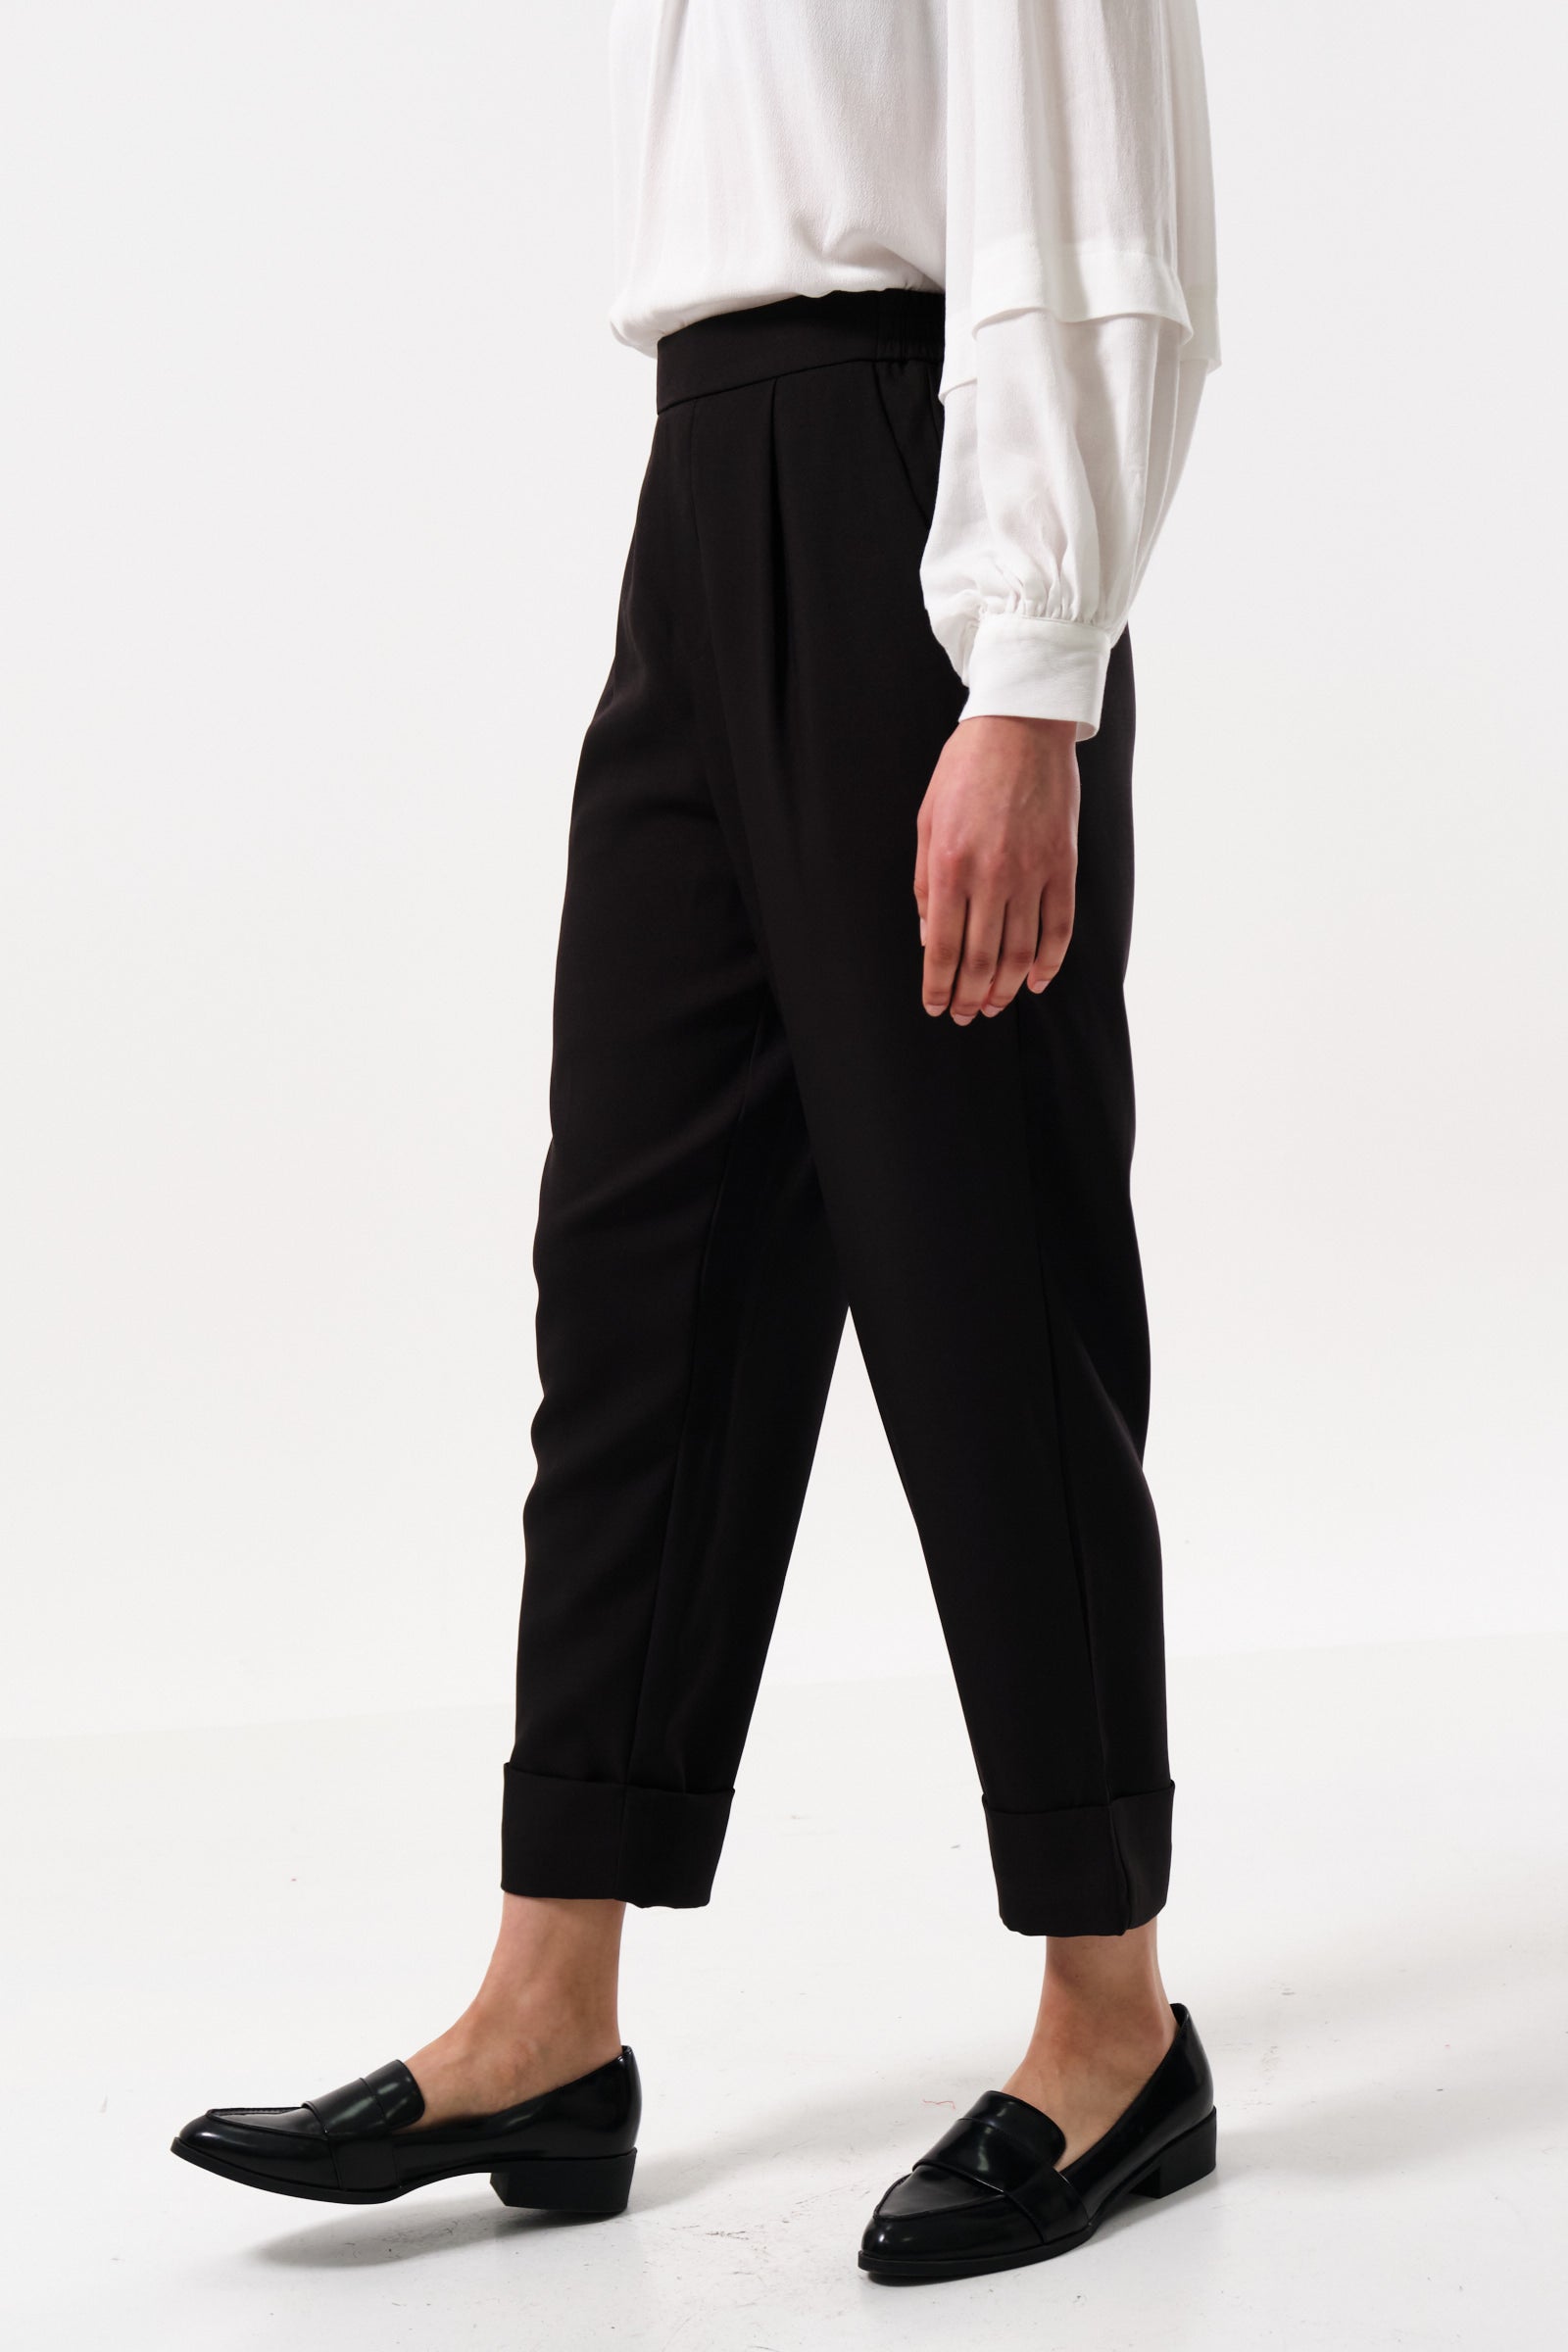 Bayeux Sustainable Fabric Tailored Crop Black Trousers